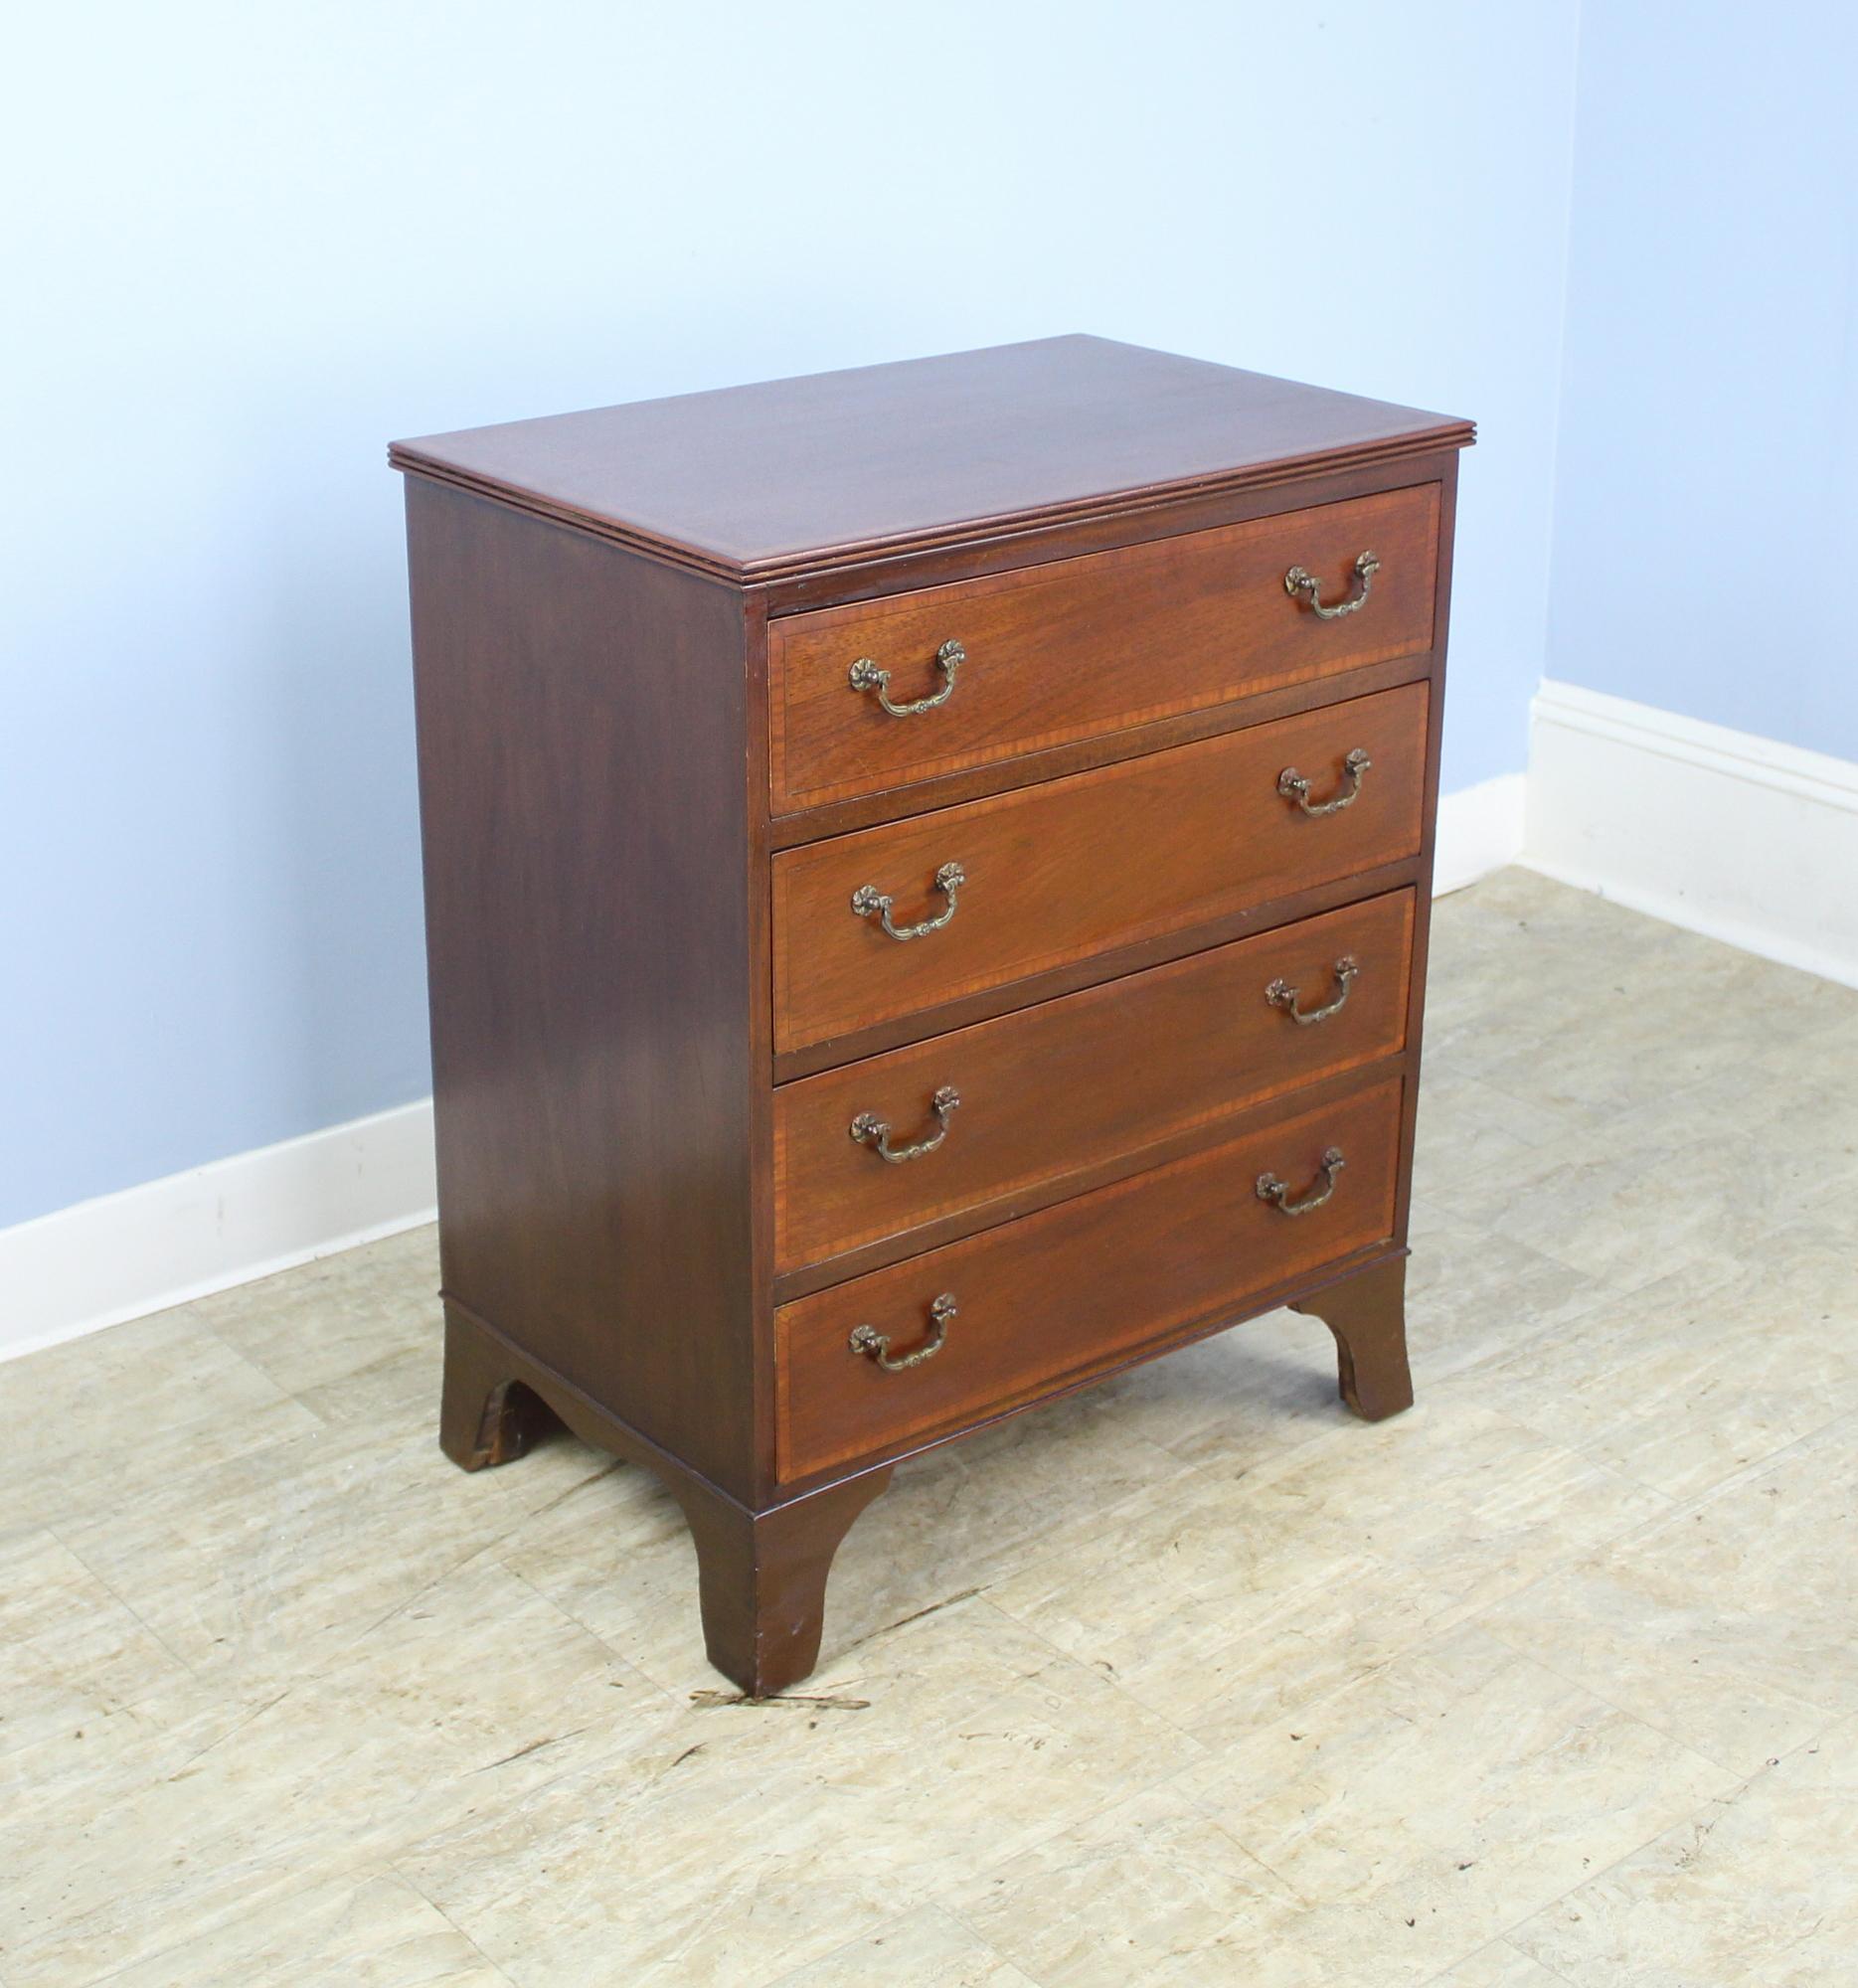 A diminutive chest of drawers with a grand personality! Rich mahogany with kingwood banding around the drawers and top. Small reeded detail along the edge of the top.  Stylized flared feet and sweet drop handles. This would work well in a child's